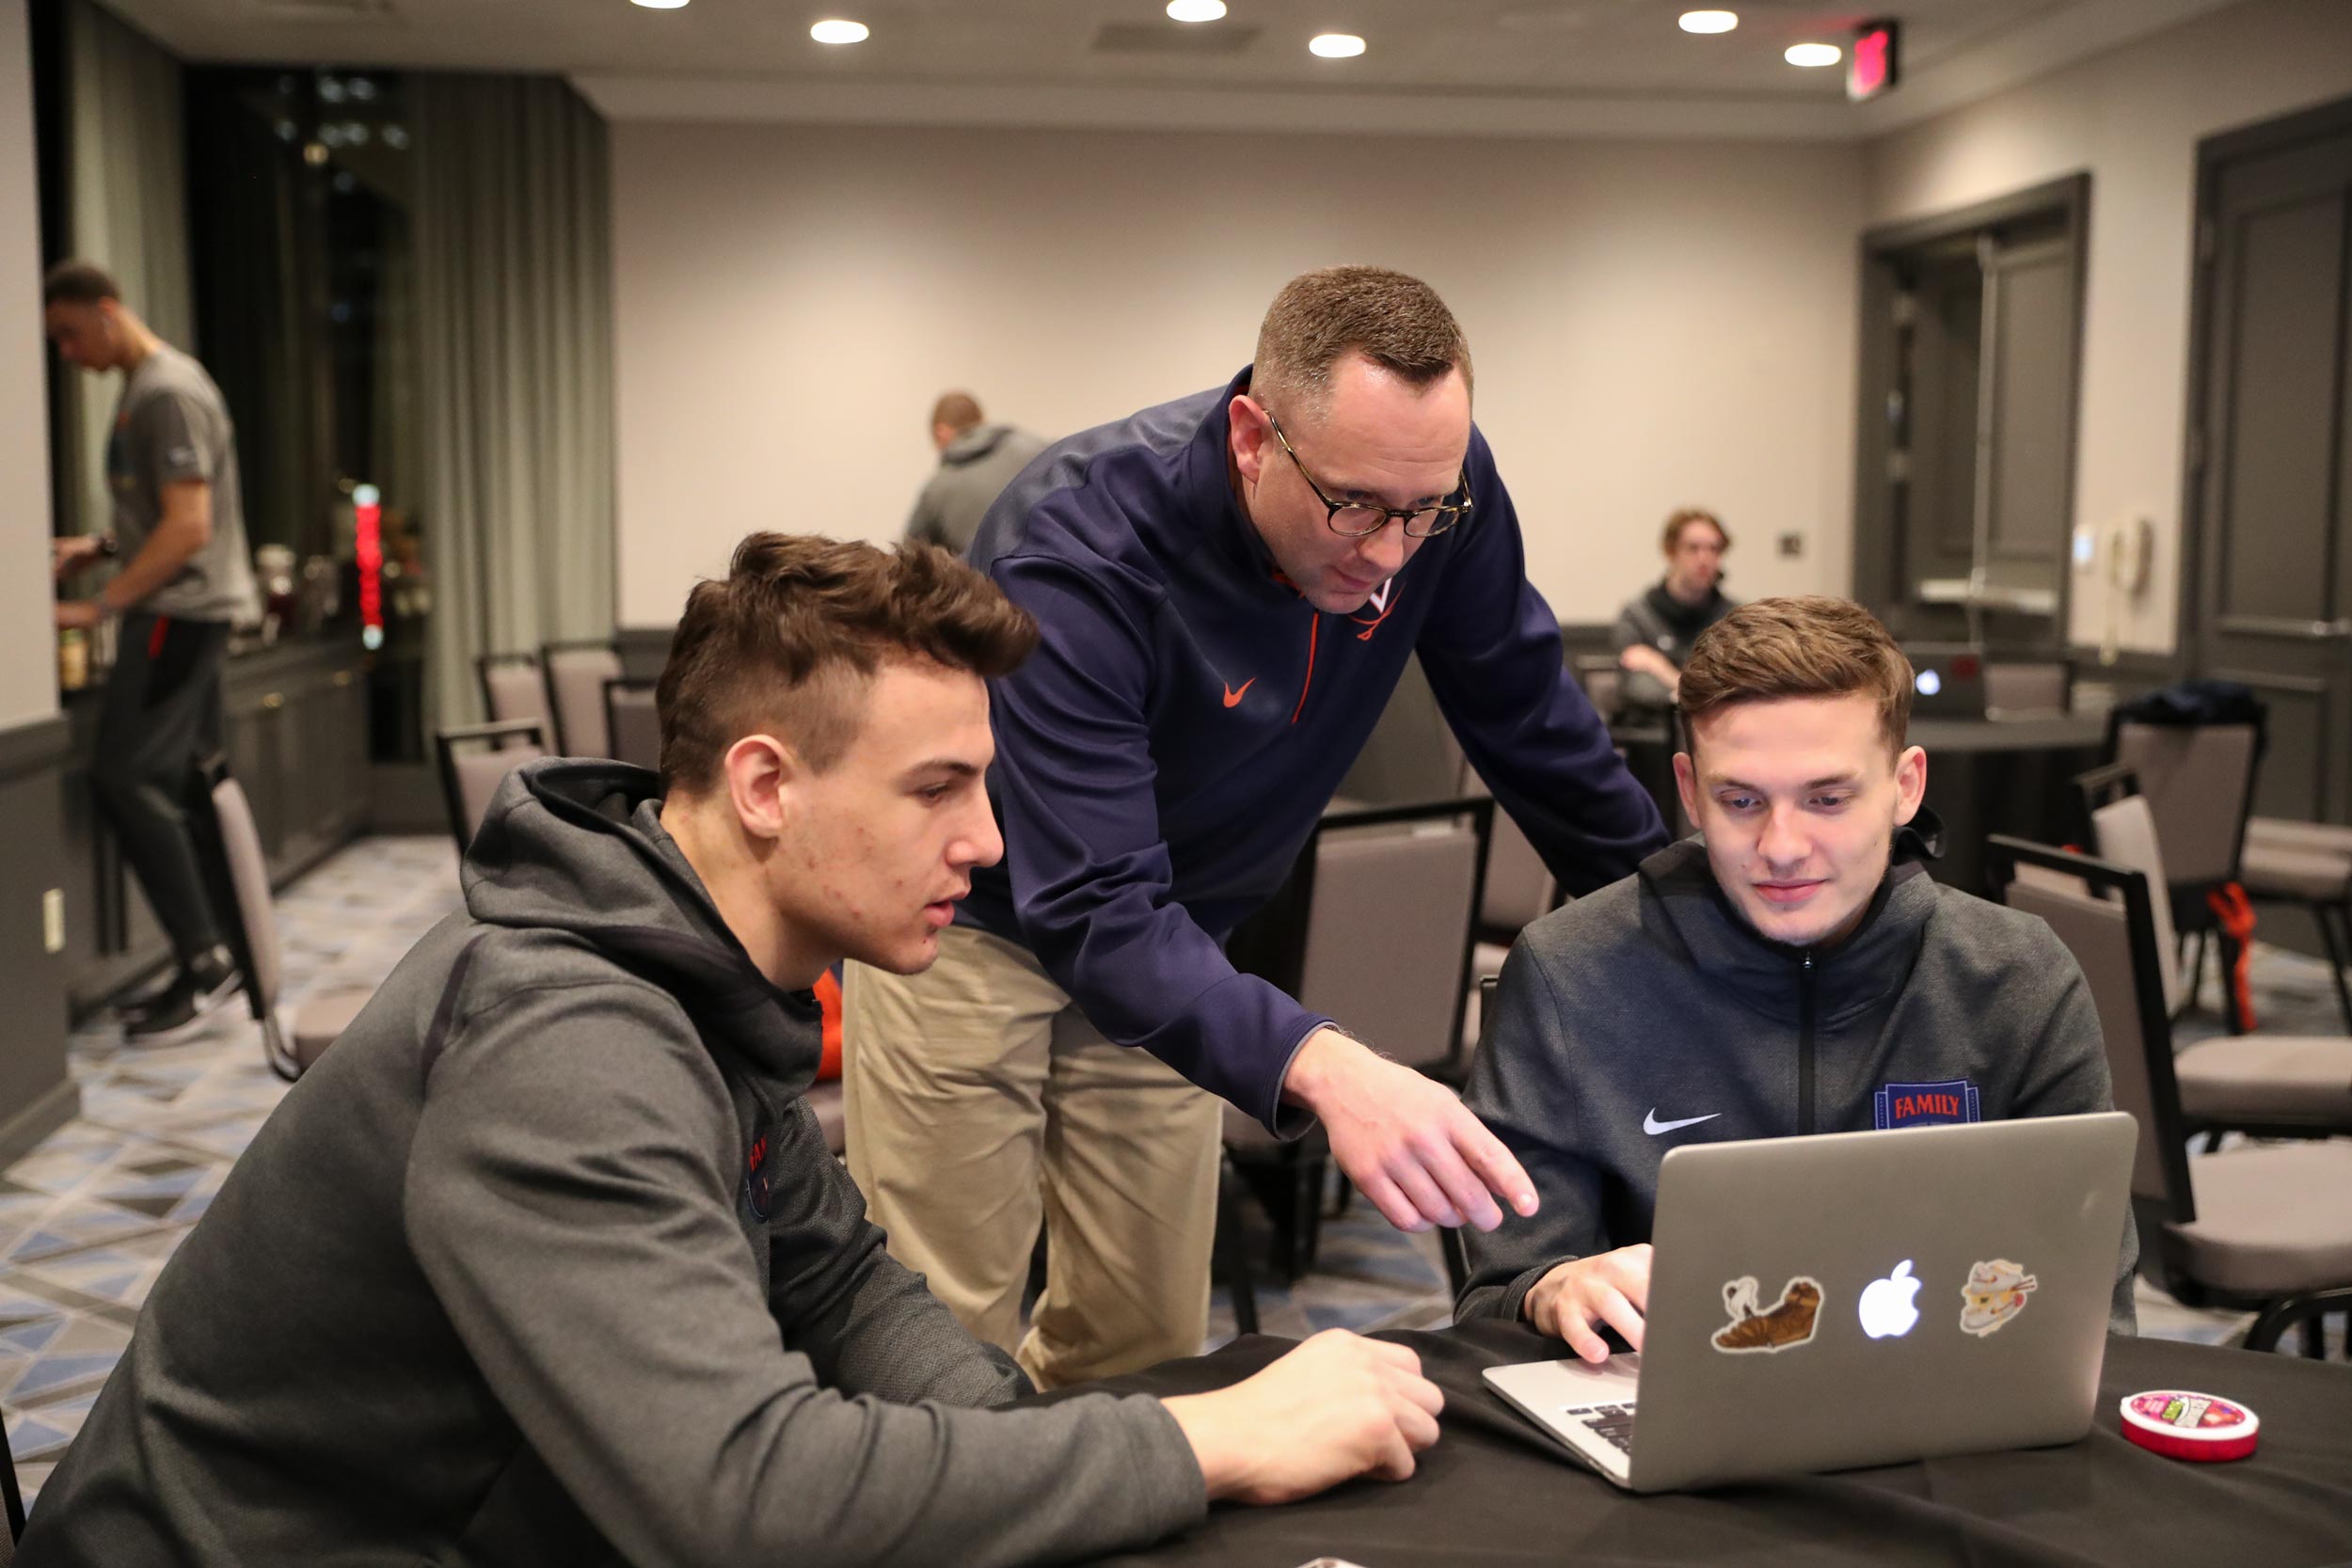 T.J. Grams, center, works with Francisco Caffaro, left, and Kyle Guy at a study hall Wednesday in Minneapolis. Grams helps players connect with professors and the academic resources they need to succeed. (Photo by Matt Riley, UVA Athletics)